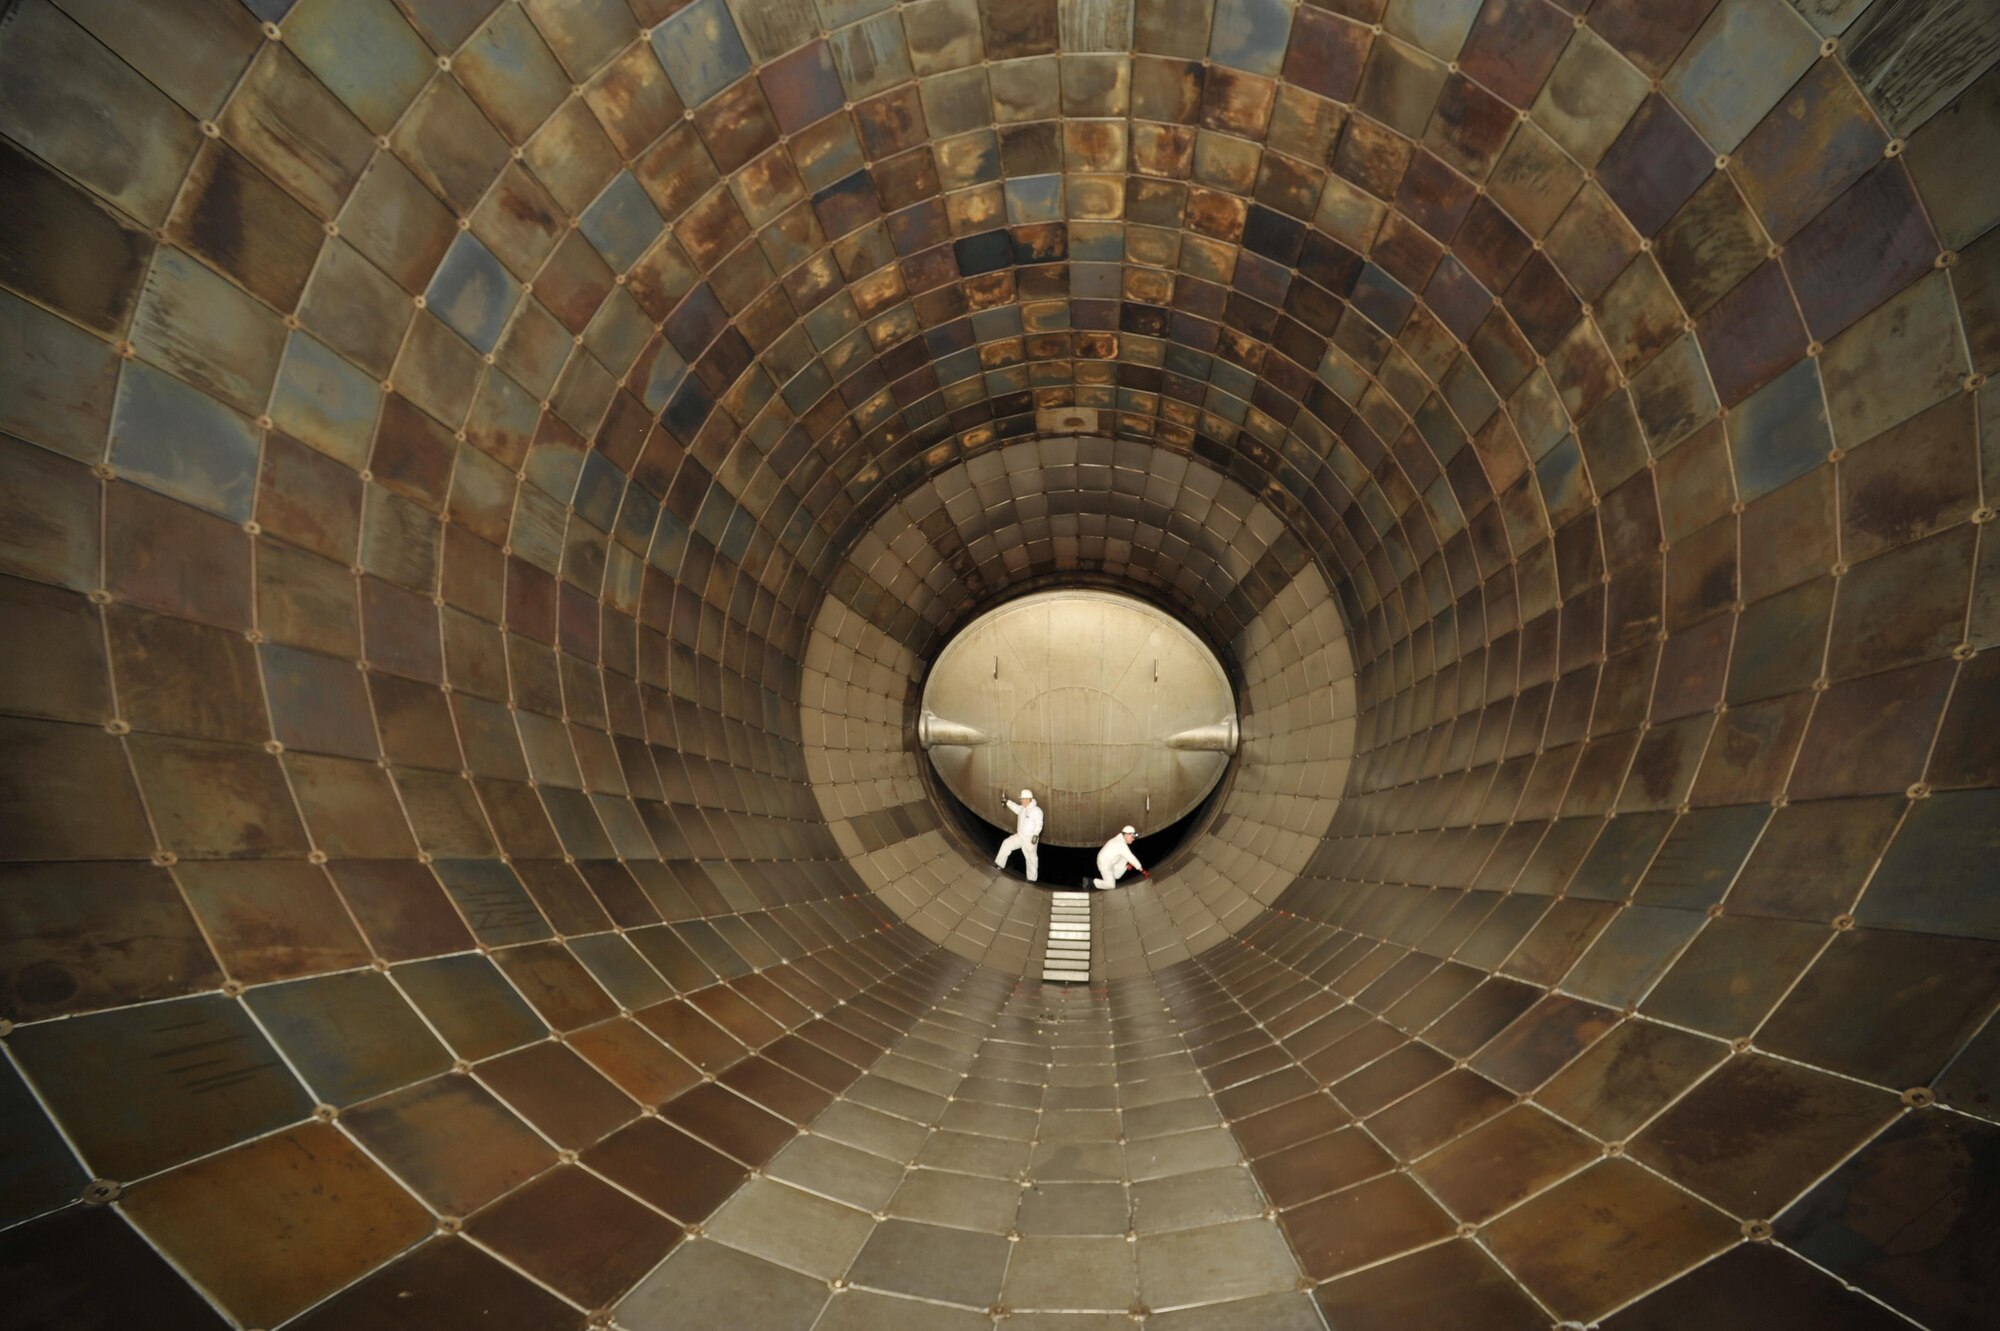 AEDC workers inspect tiles in the Propulsion Wind Tunnel 16-foot Supersonic Tunnel in 2014. (U.S. Air Force photo/Rick Goodfriend)